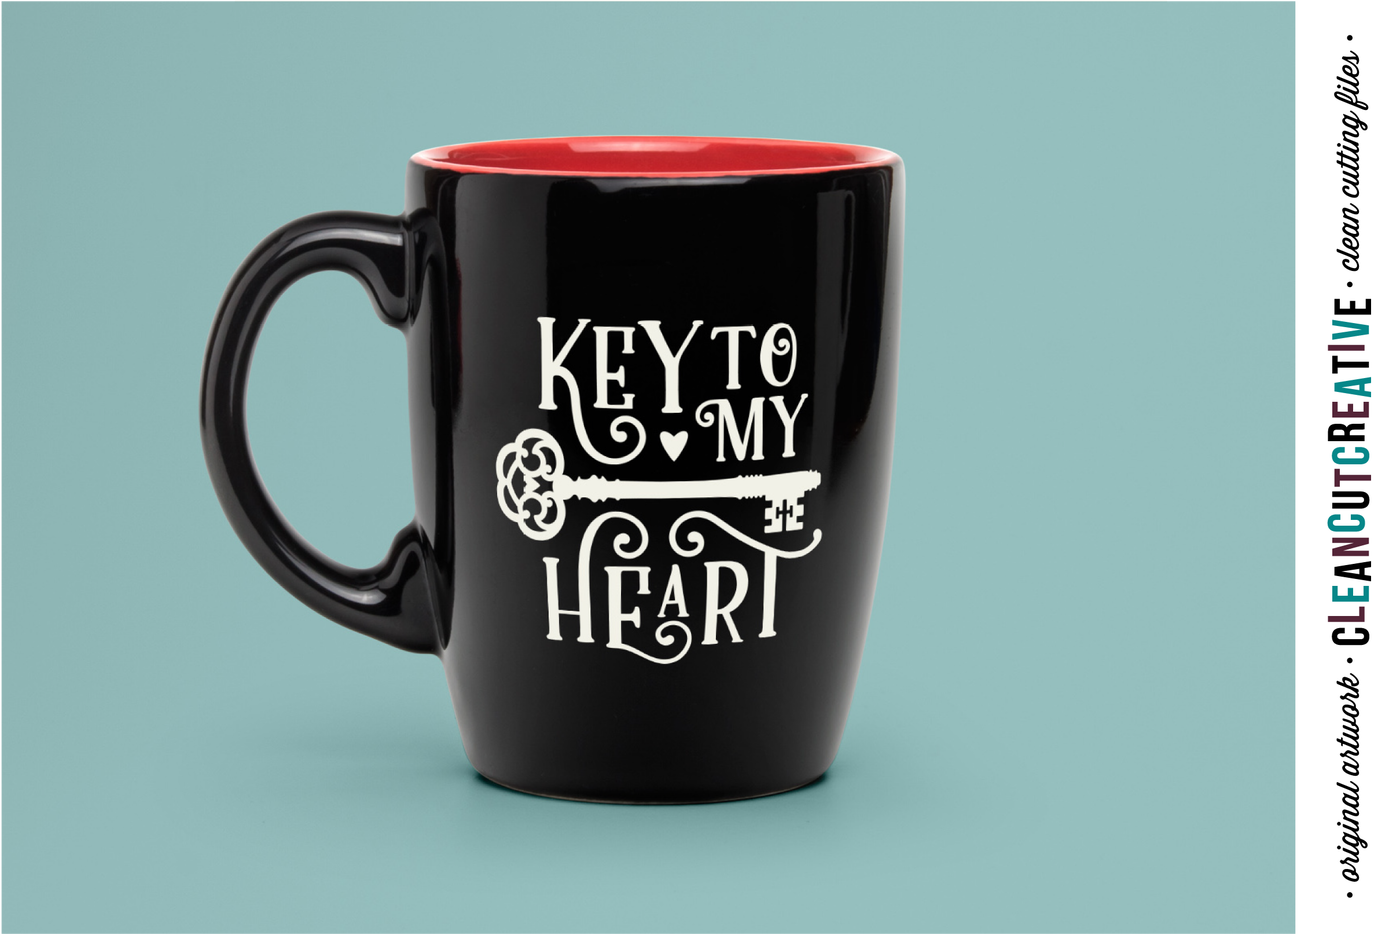 Key To My Heart Love Cutfile Vintage Key Svg Dxf Eps Png Cricut Silhouette Clean Cutting Files By Cleancutcreative Thehungryjpeg Com